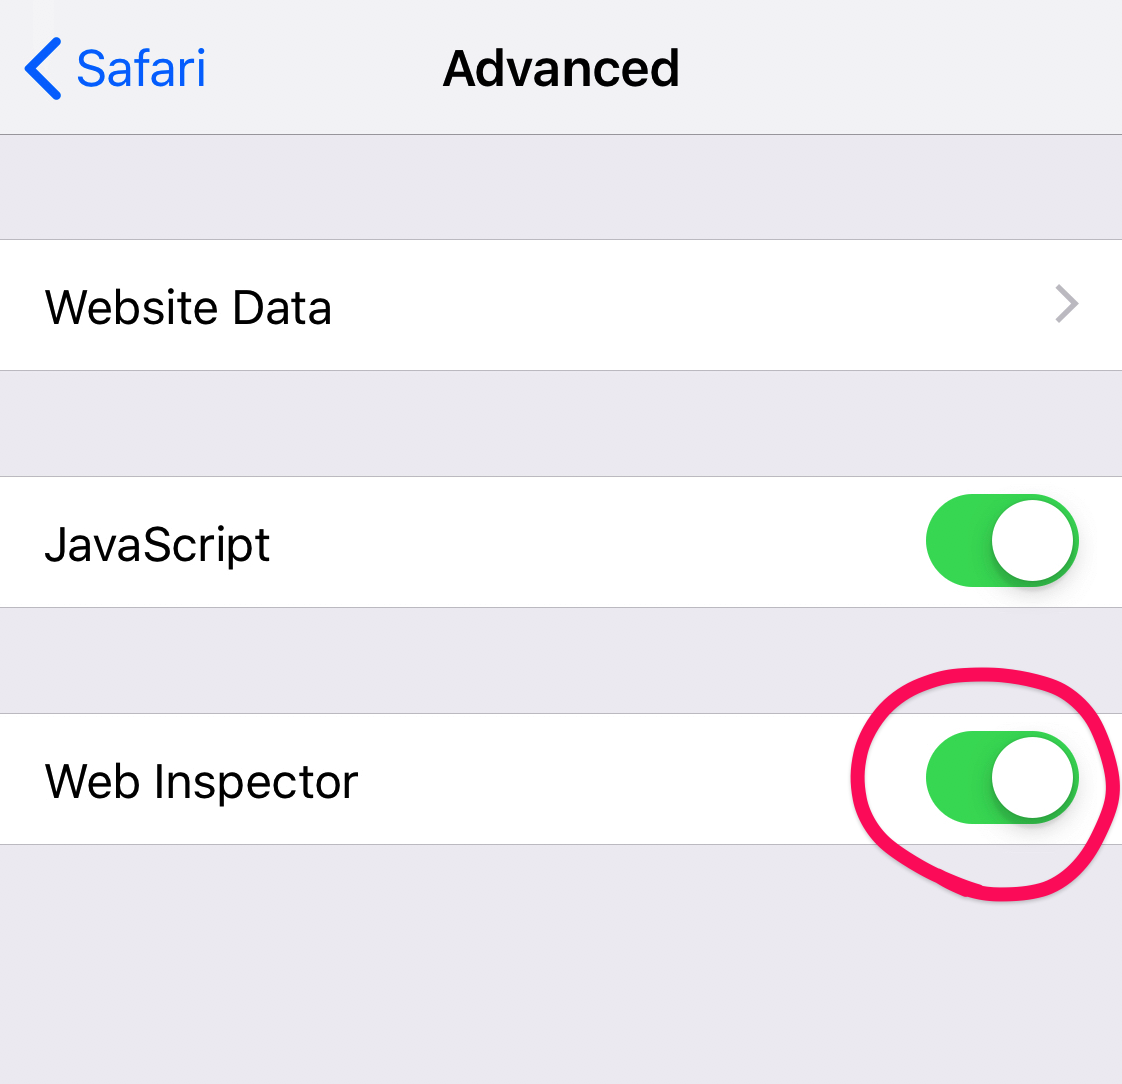 The iPhone Safari settings, showing the Web Inspector toggle checked on